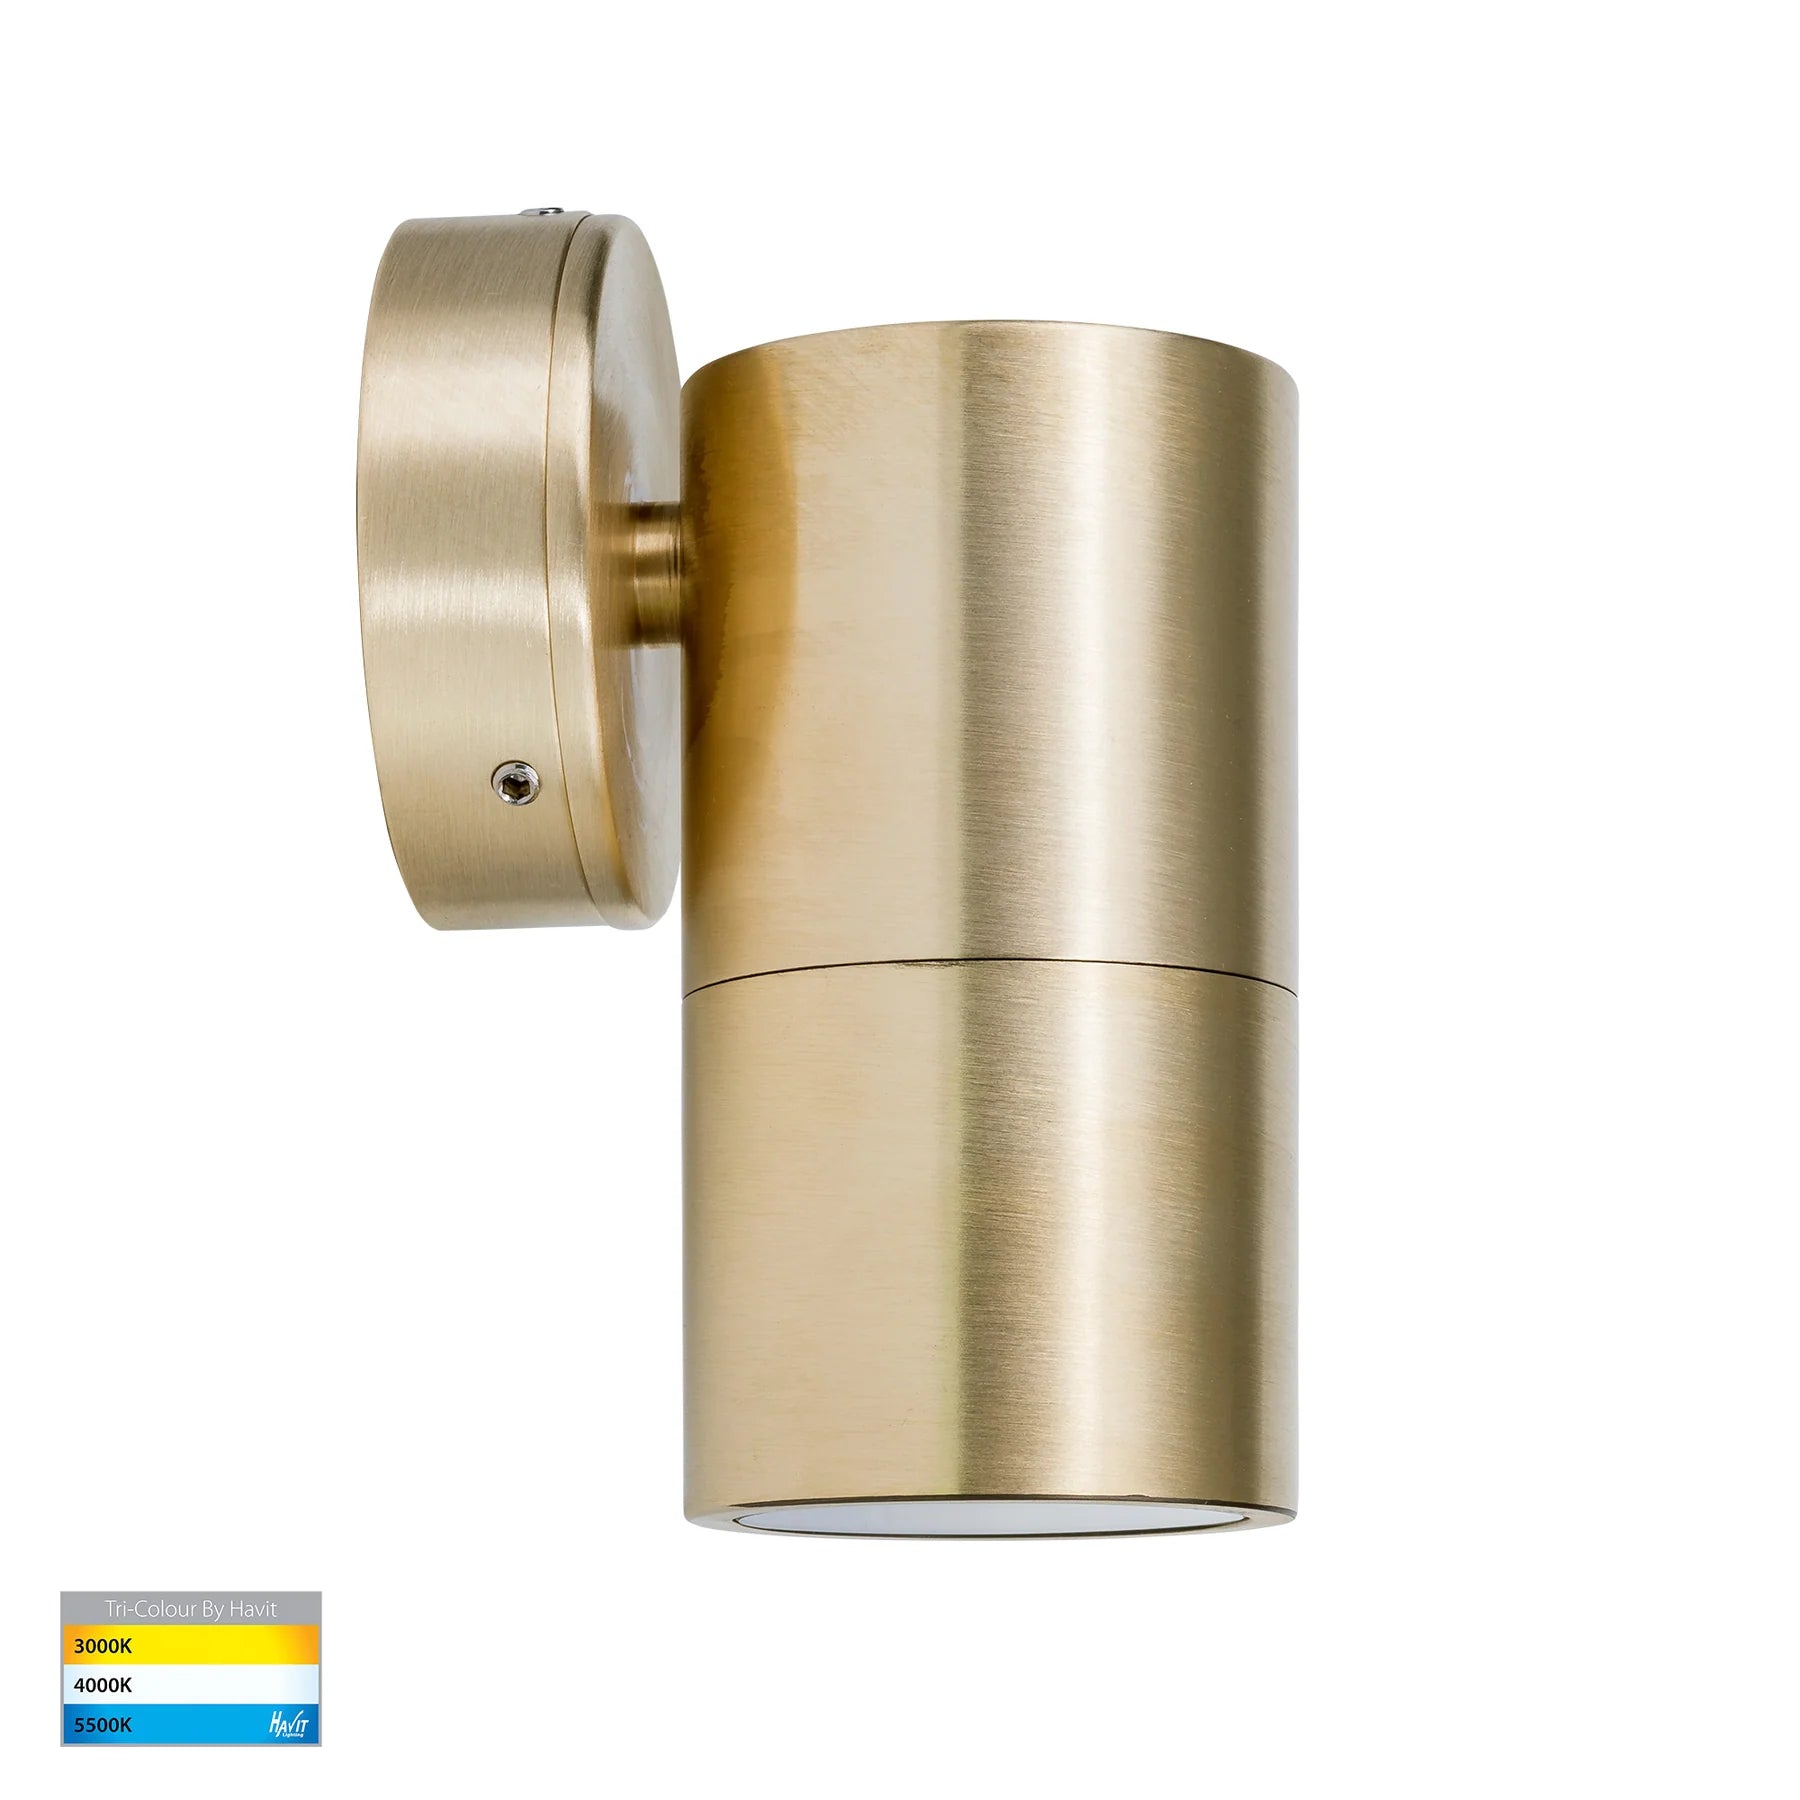 Tivah Exterior Down Wall Light Solid Brass 3 CCT - HV1155T